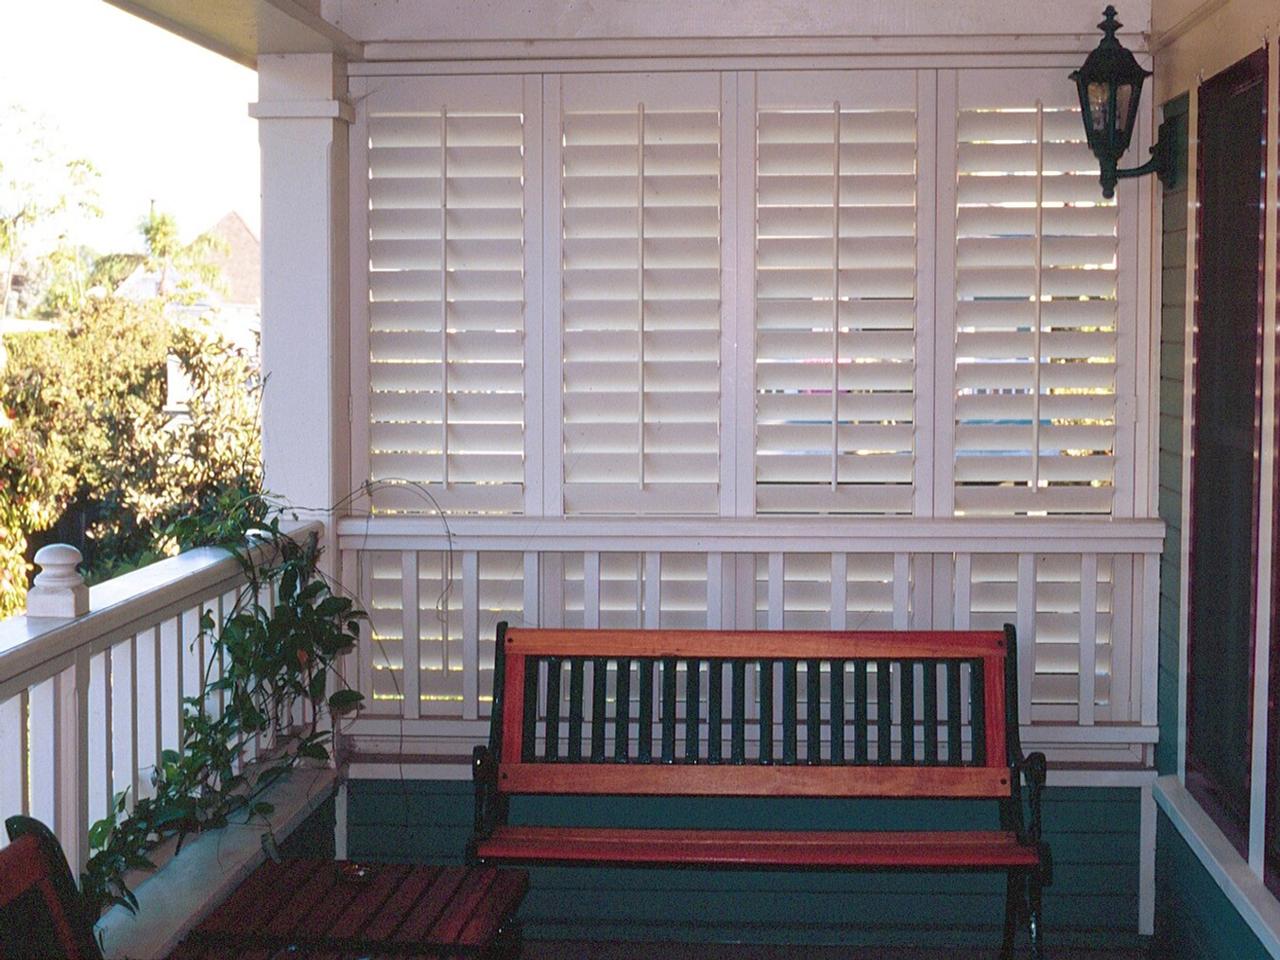 Louverwood shutters on a porch